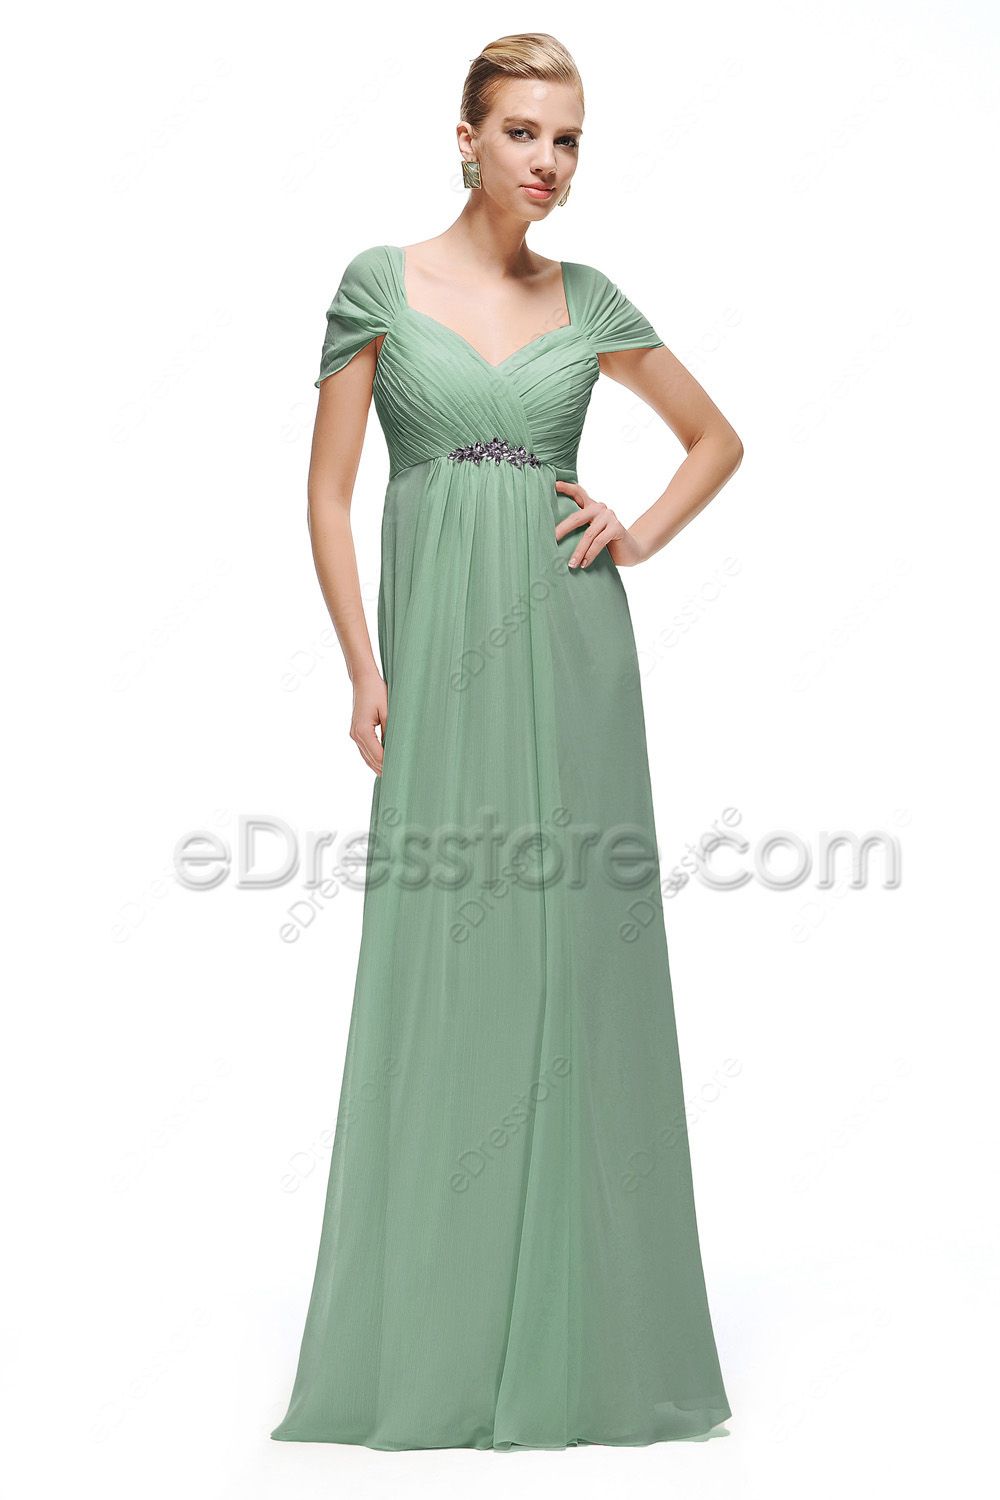 Sage Green Maternity Bridesmaid Dresses with Crystal | eDresstore